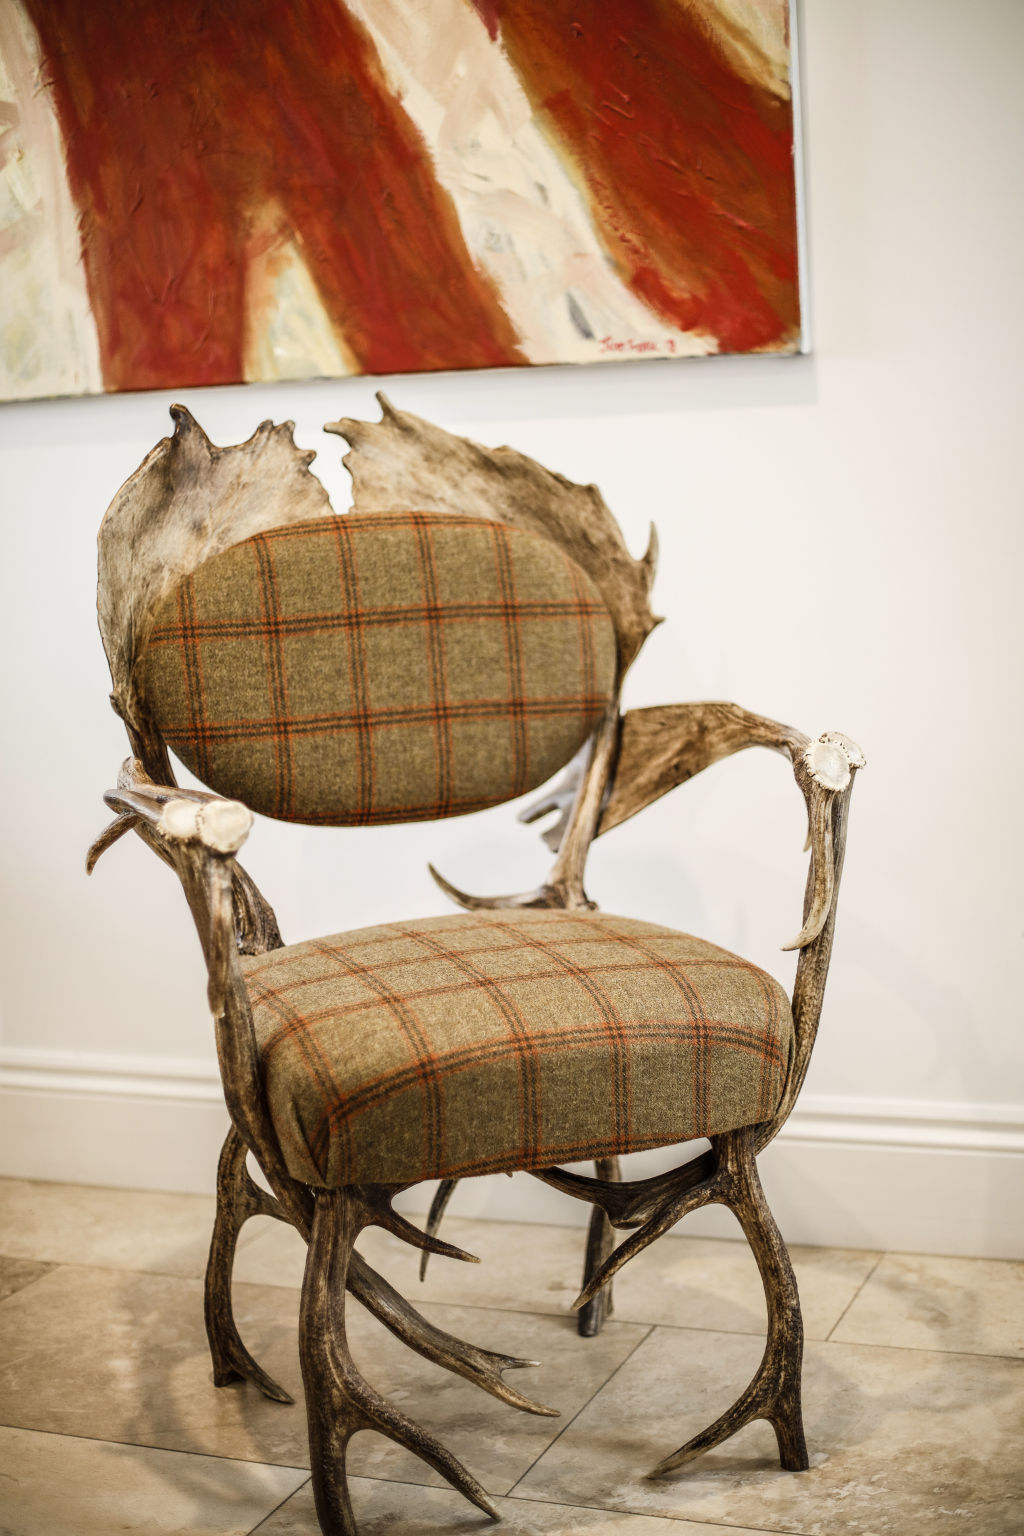 A Scottish antler chair made from red deer antler and woven tapestry sits proudly in the home. Photo: Julian Kingma